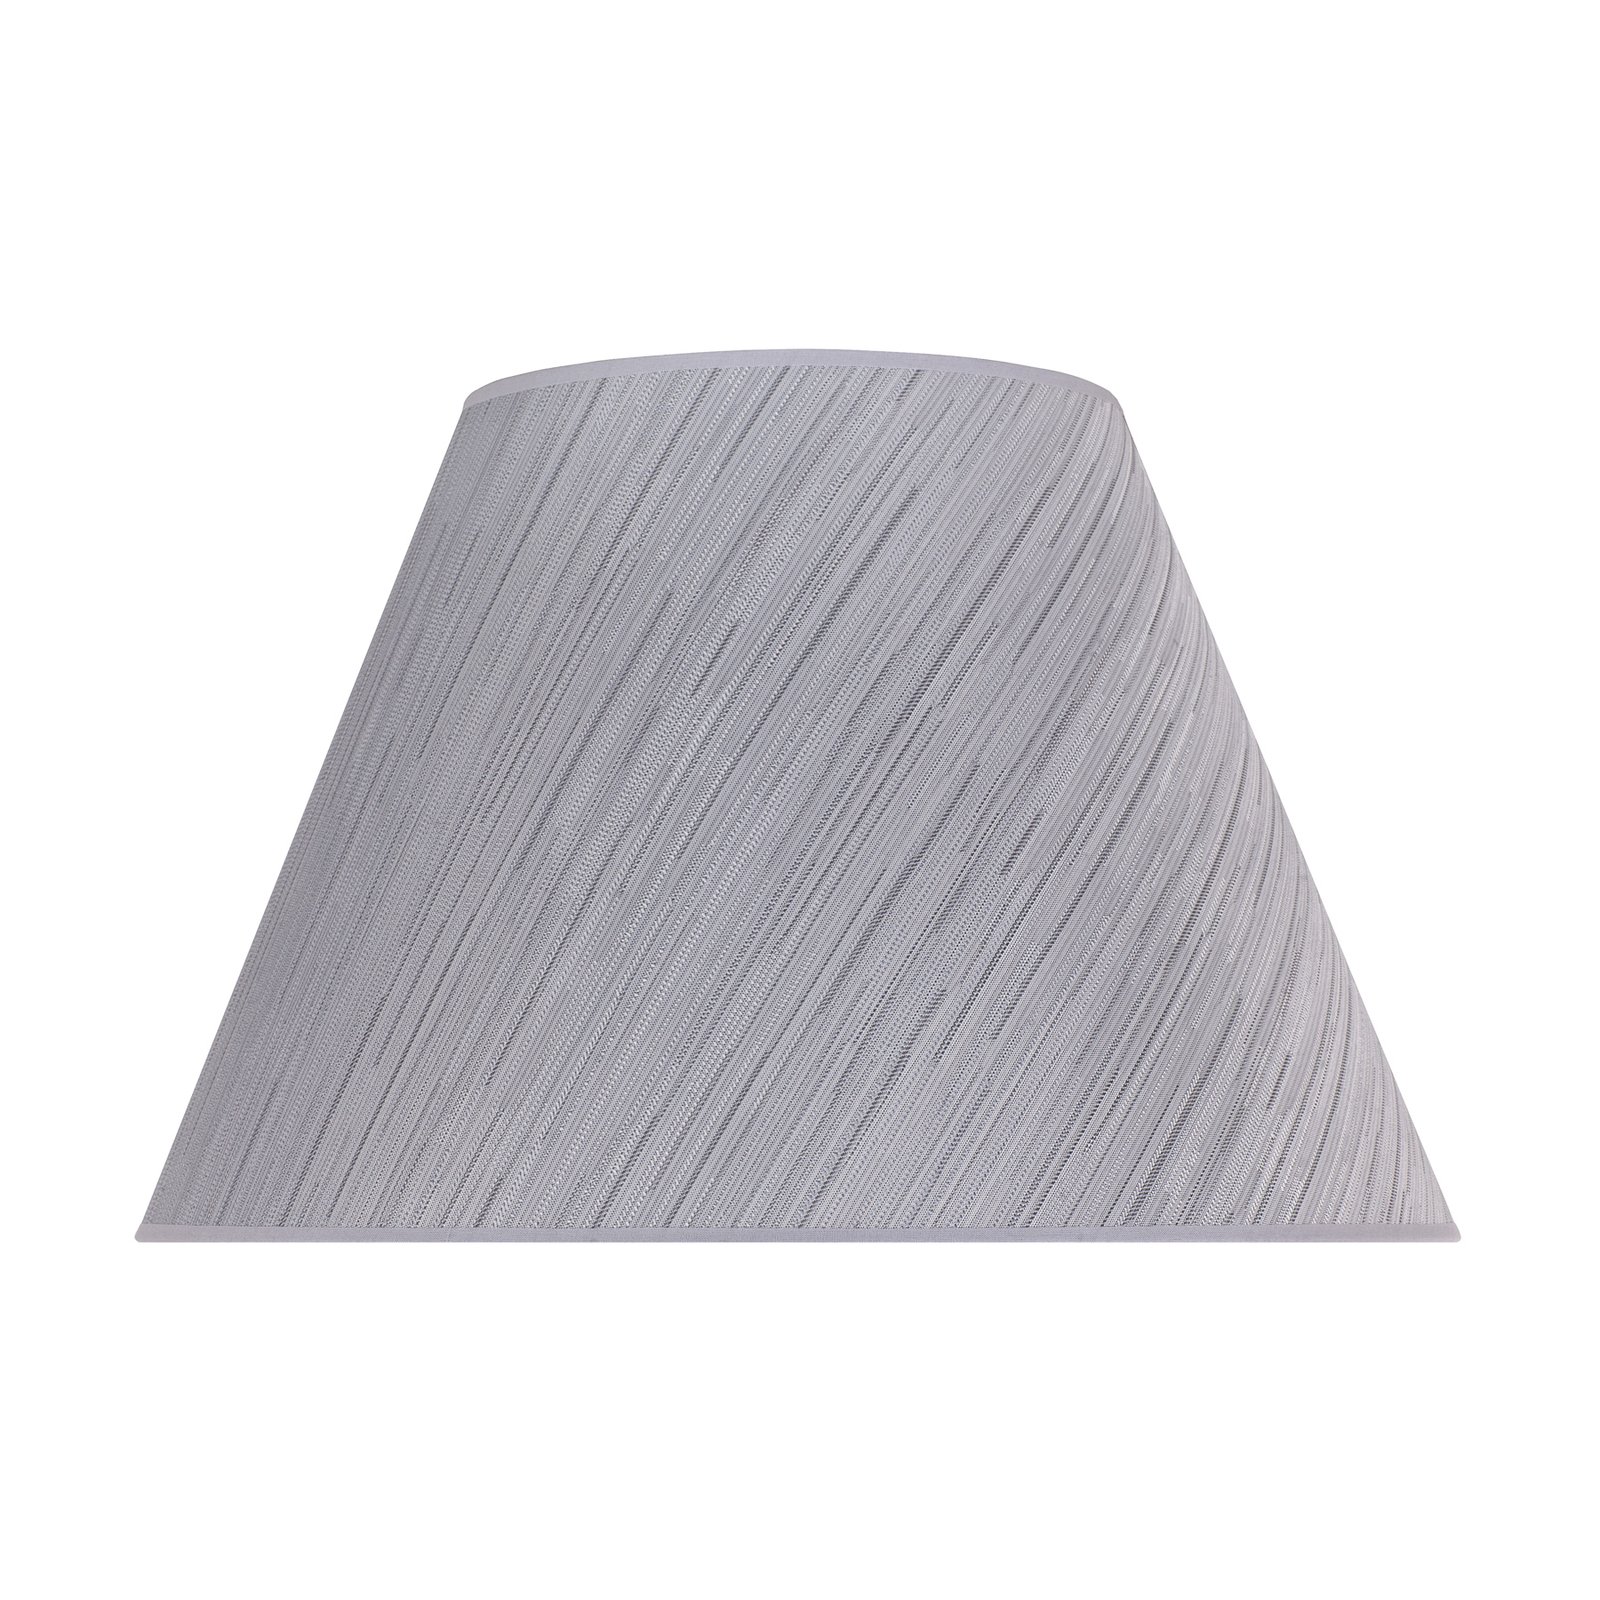 Sofia lampshade height 31 cm, silver striped